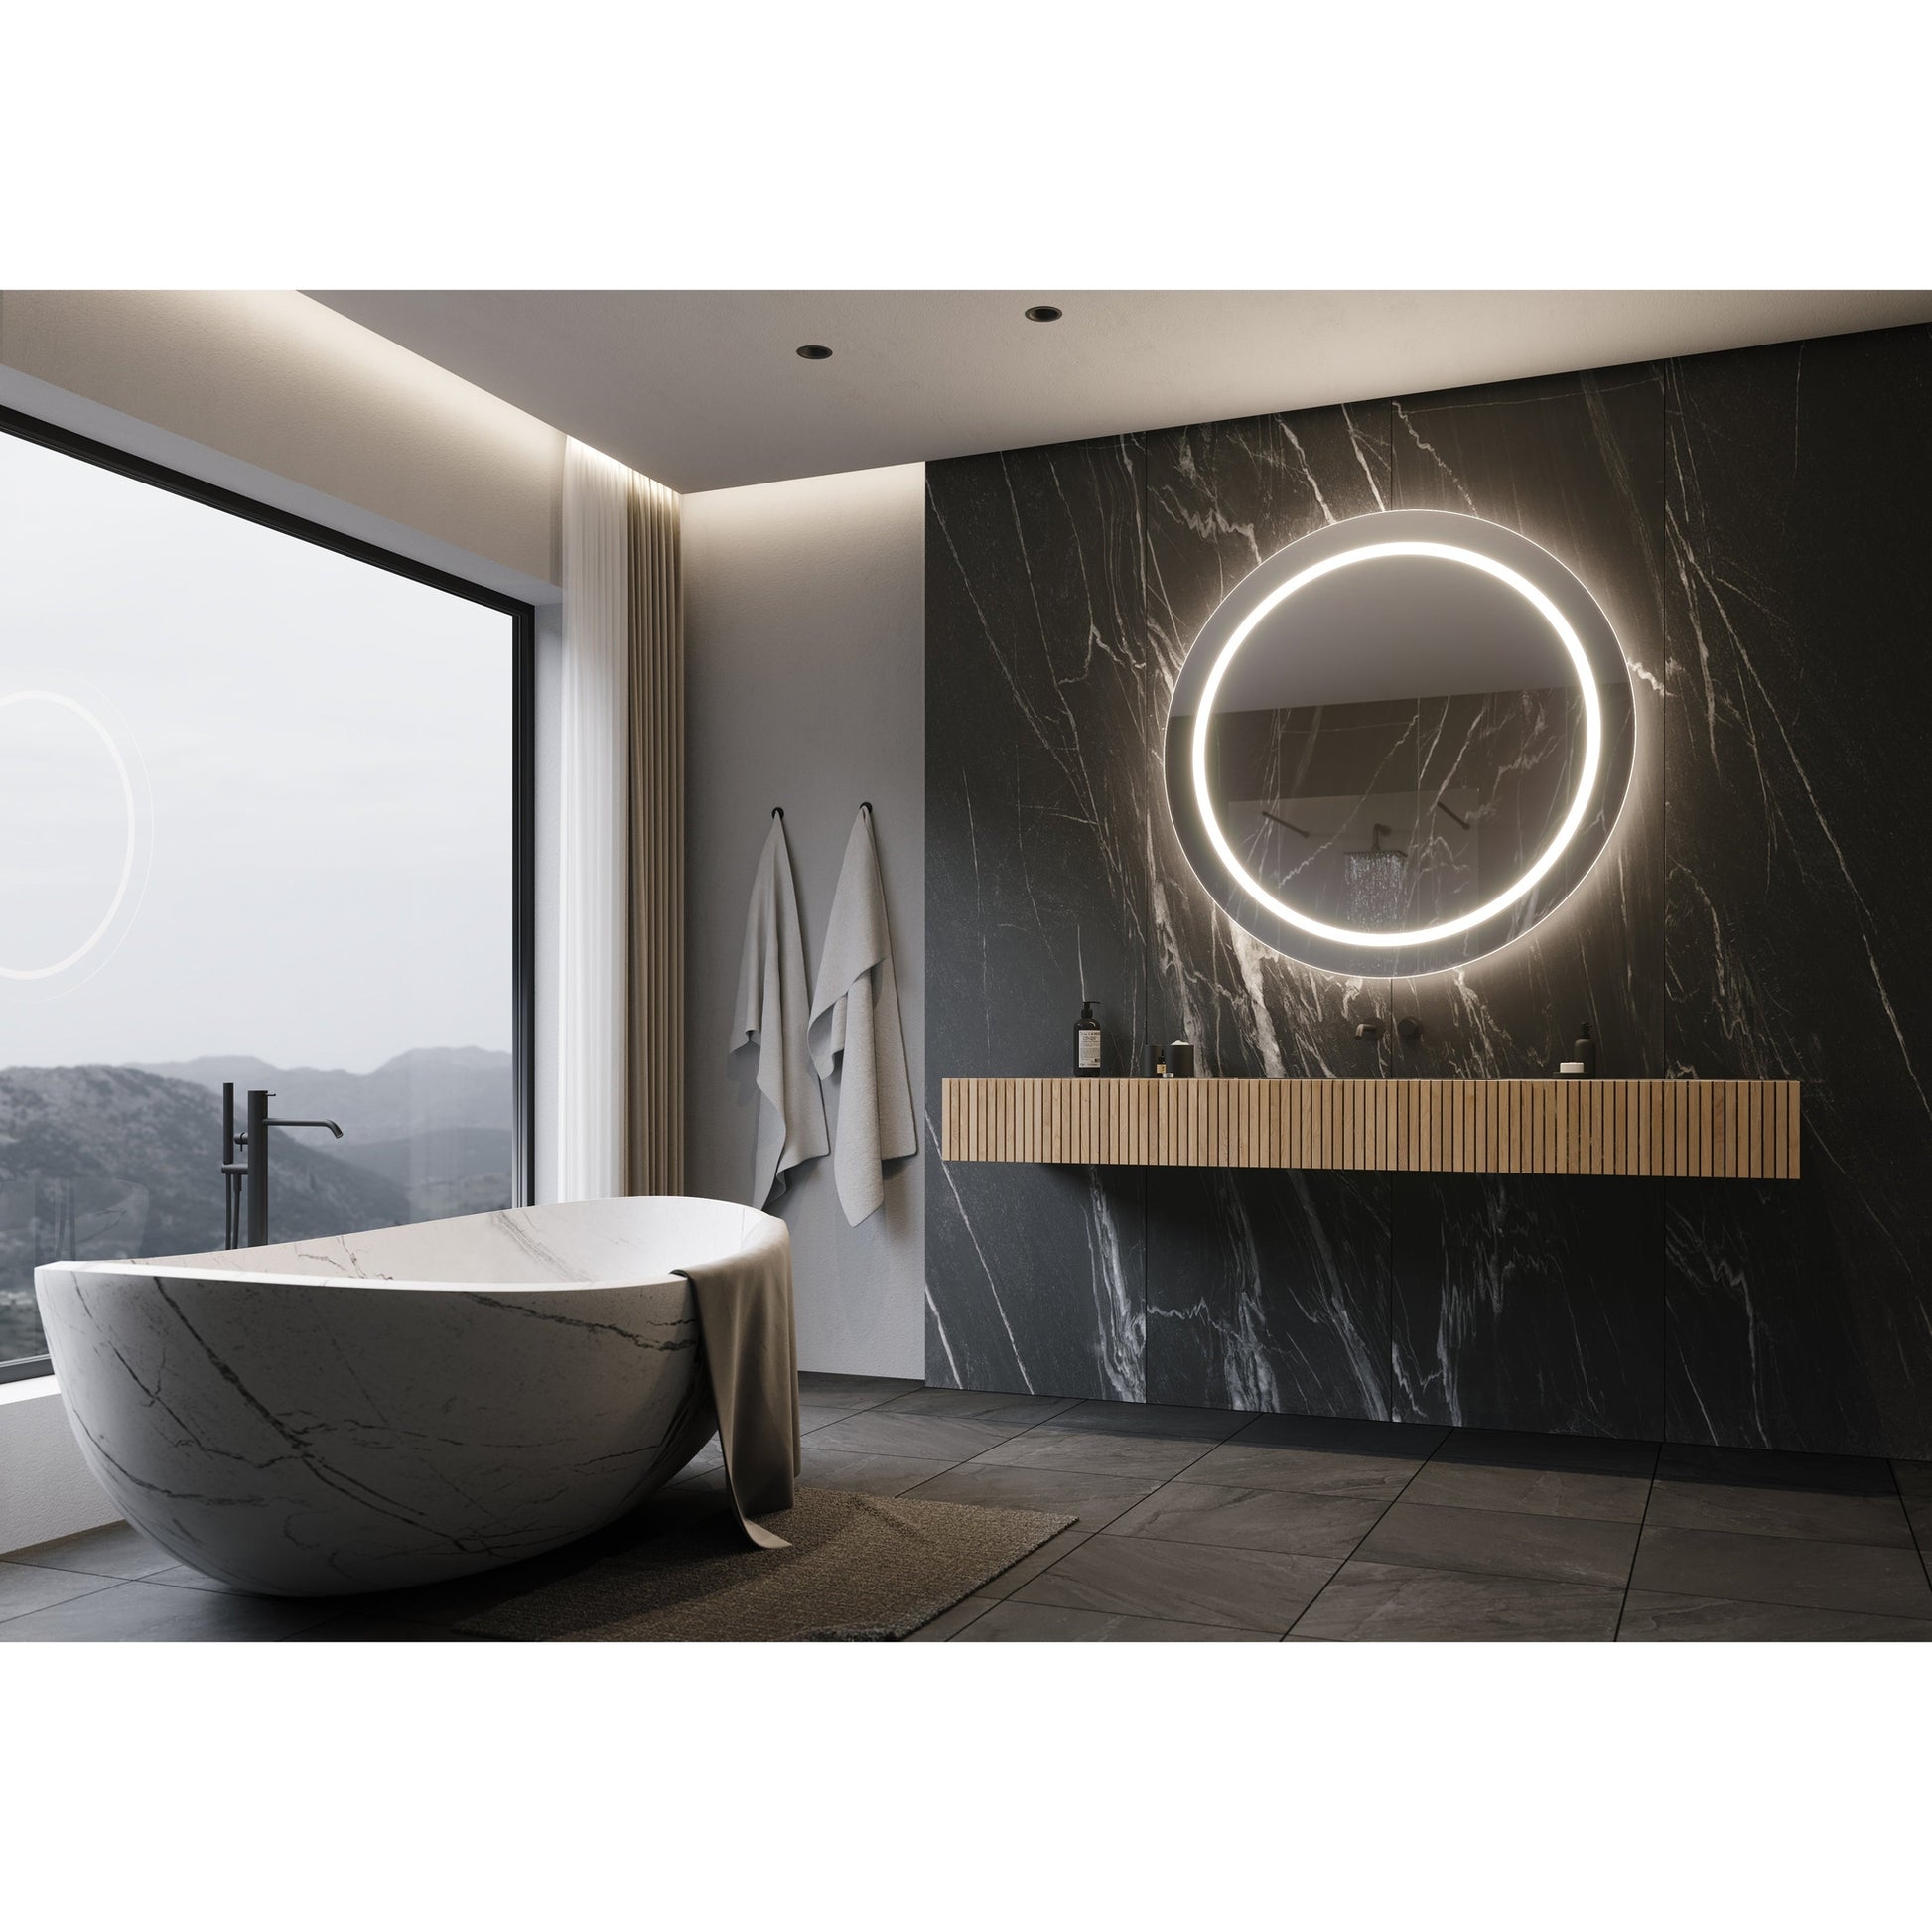 Paris Mirror Harmony Round 44" x 44" Front-Lit Illuminated Super Bright Dimmable Wall-Mounted 6000K LED Mirror With Polished Edges